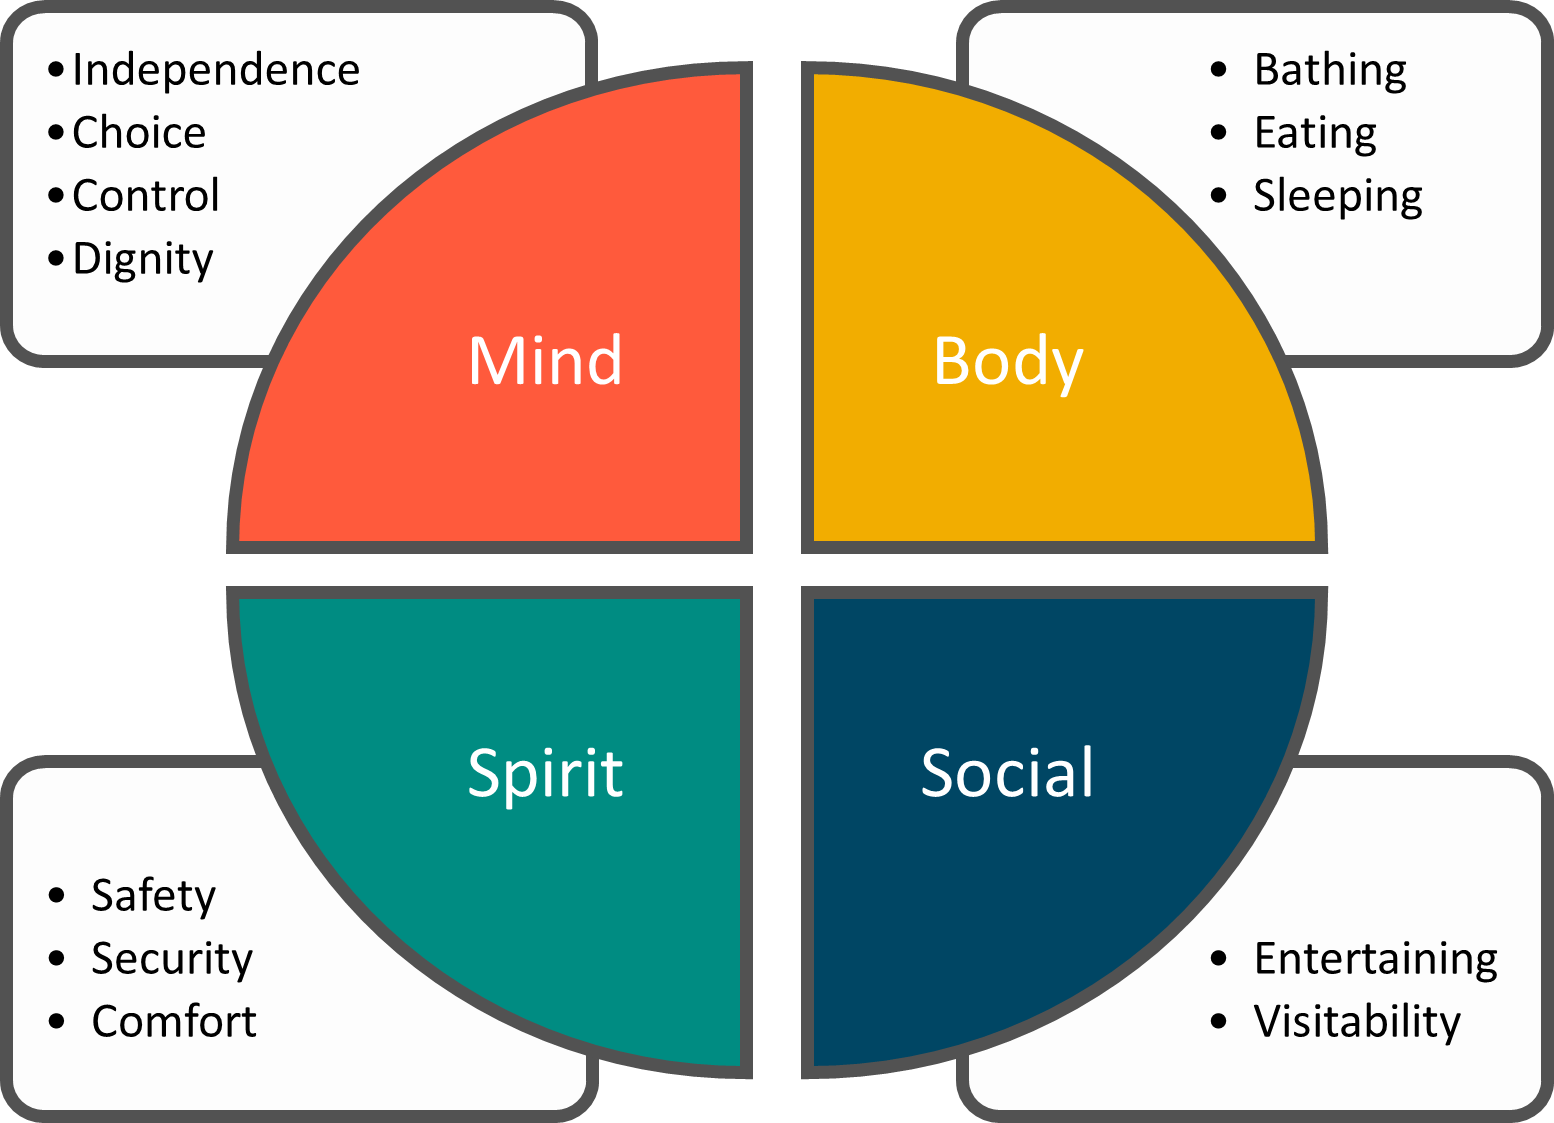 The home usability wheel graphic shows a circle broken into four pieces labeled: mind, body, social and spirit. Rectangular boxes alongside each section outline components of each. Independence, choice, control and dignity are part of mind. Bathing, eating, sleeping are part of body. Entertaining and visitability are part of social. Safety, security and comfort are part of spirit. 